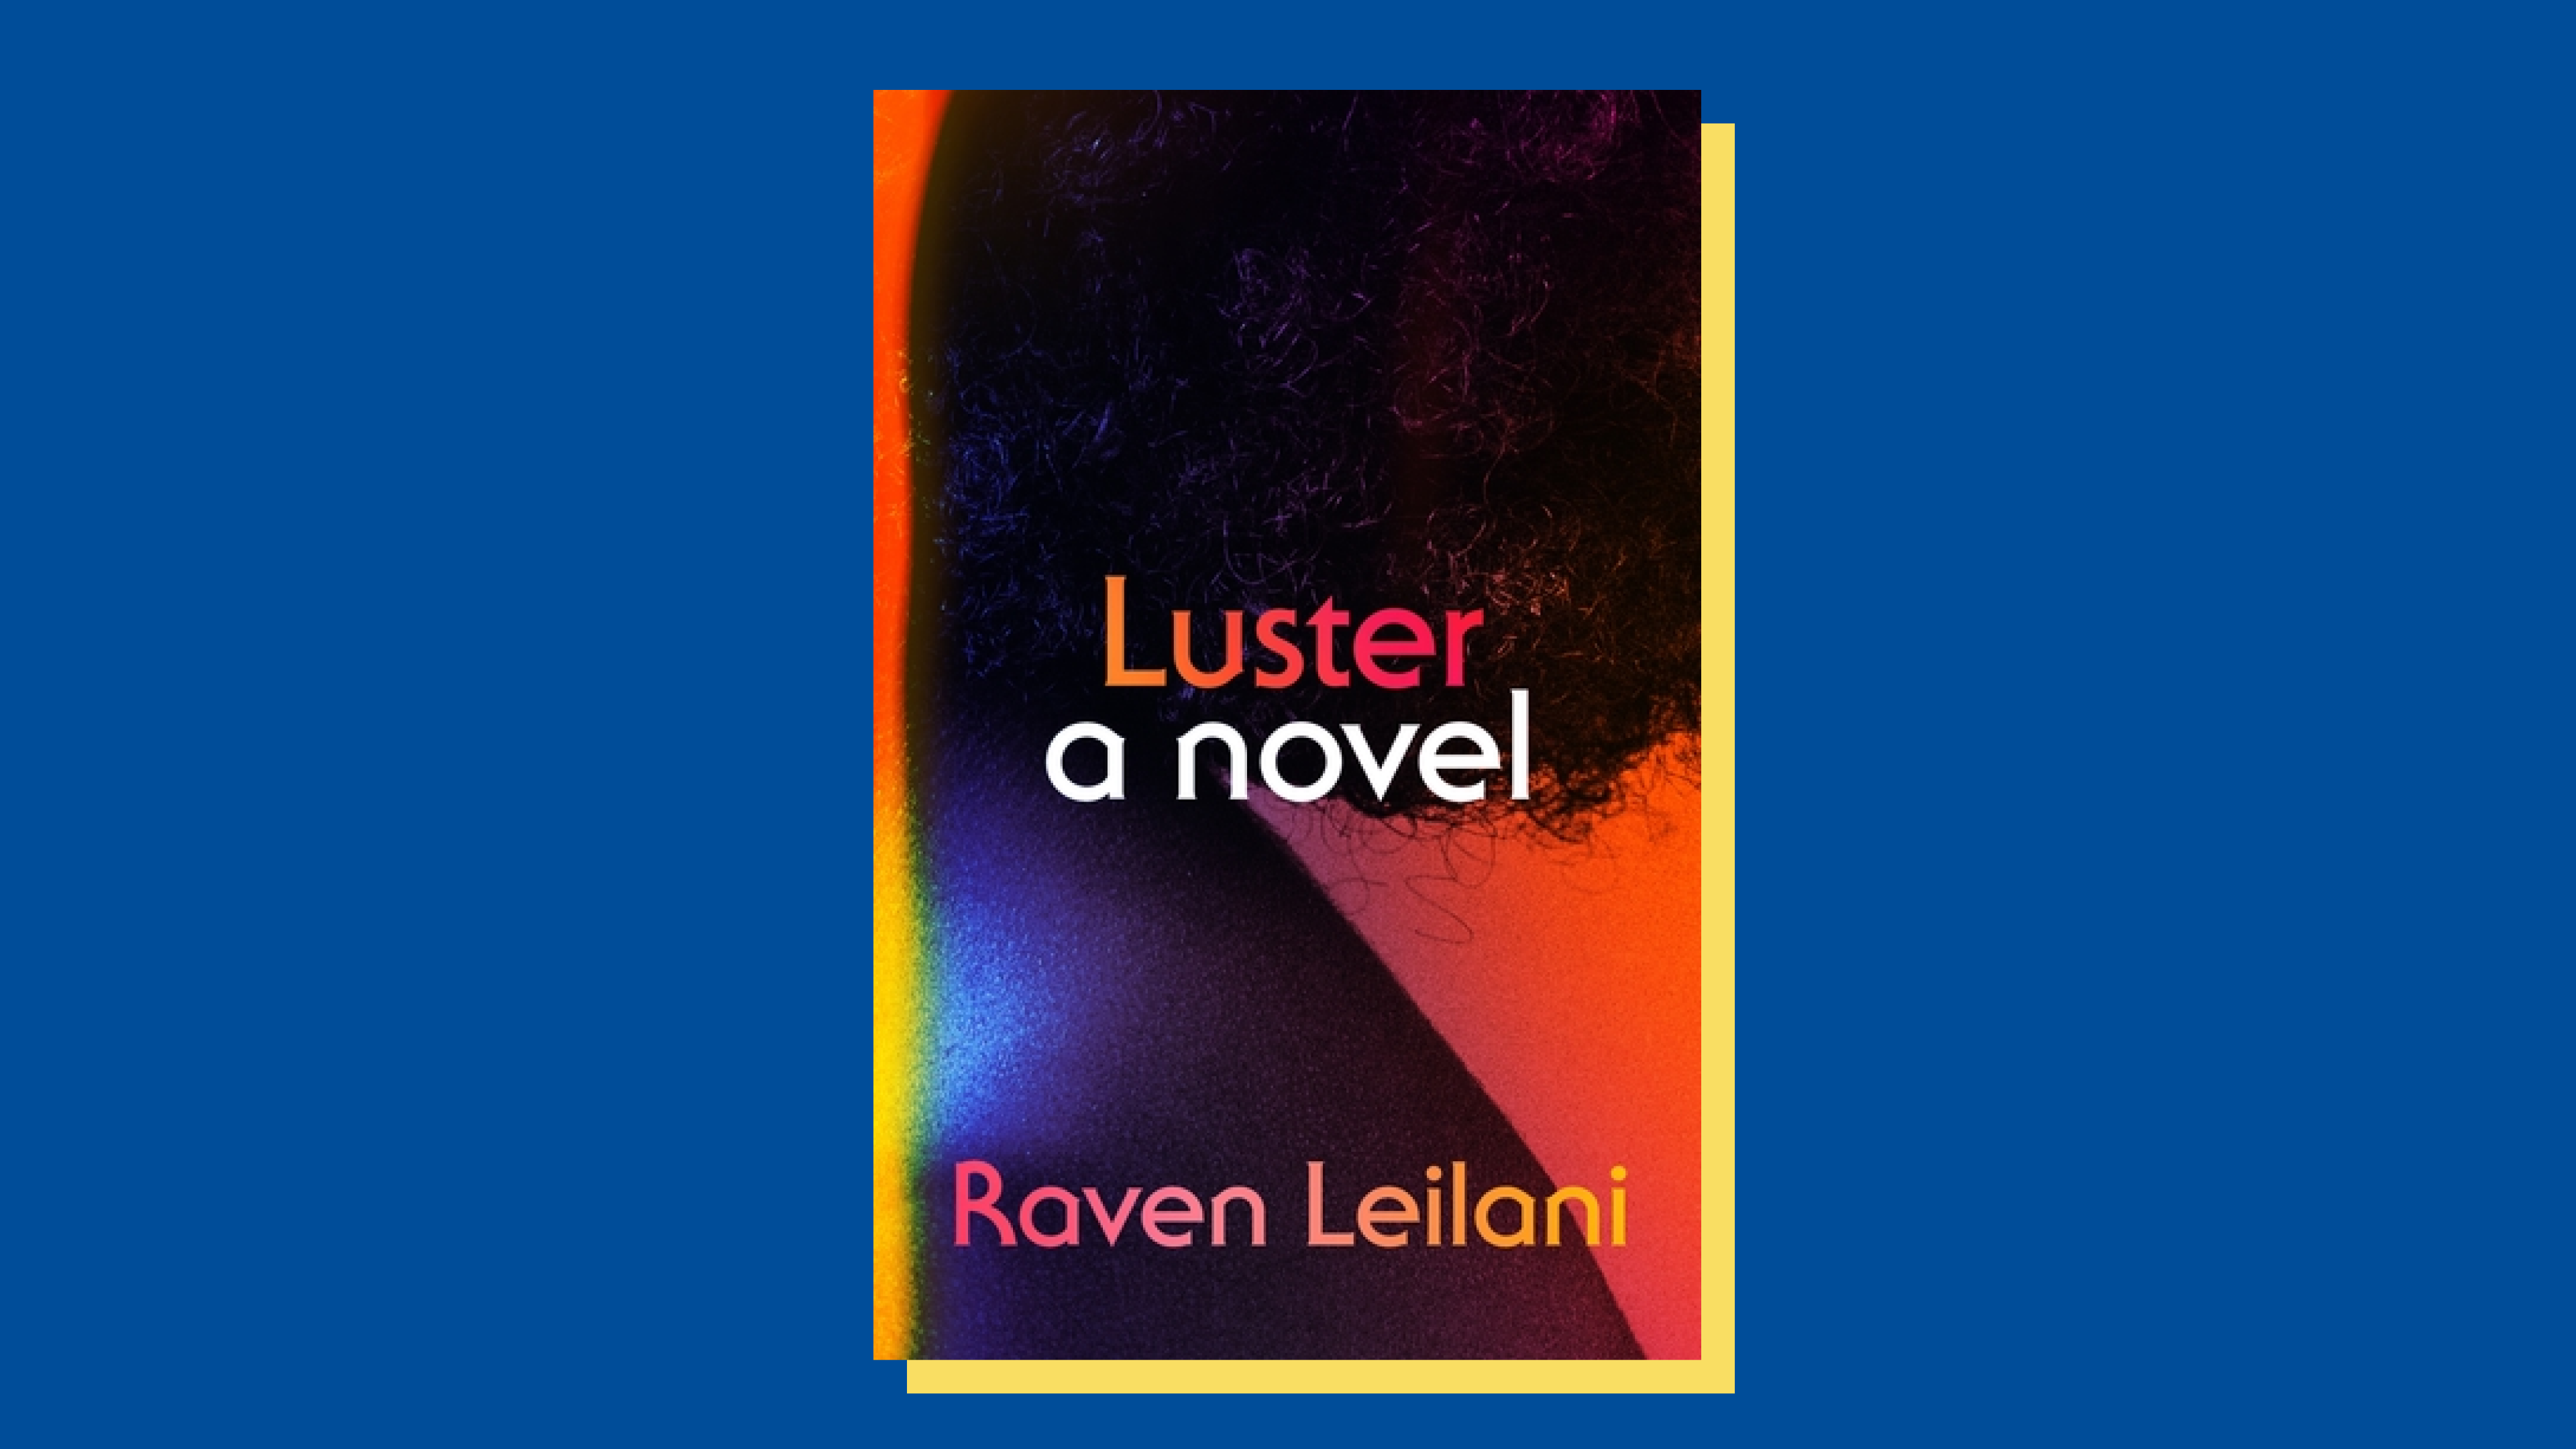 “Luster” by Raven Leilani